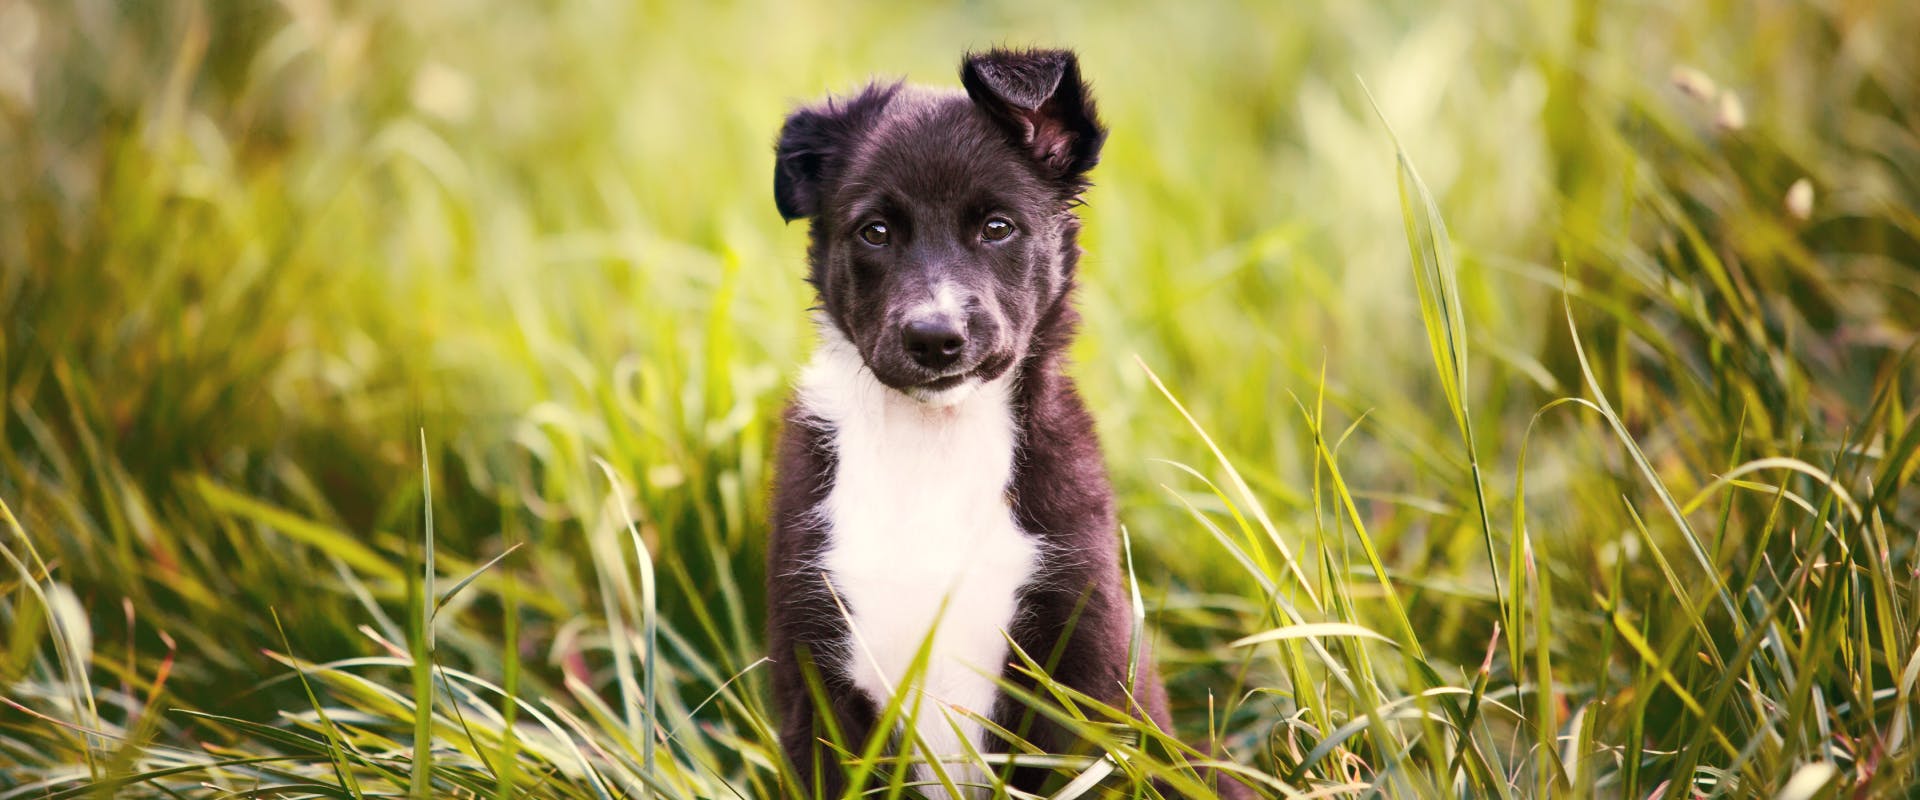 a boarder collie puppy sat in a long grass field with one ear pricked up and half flopped and the other ear flopped down